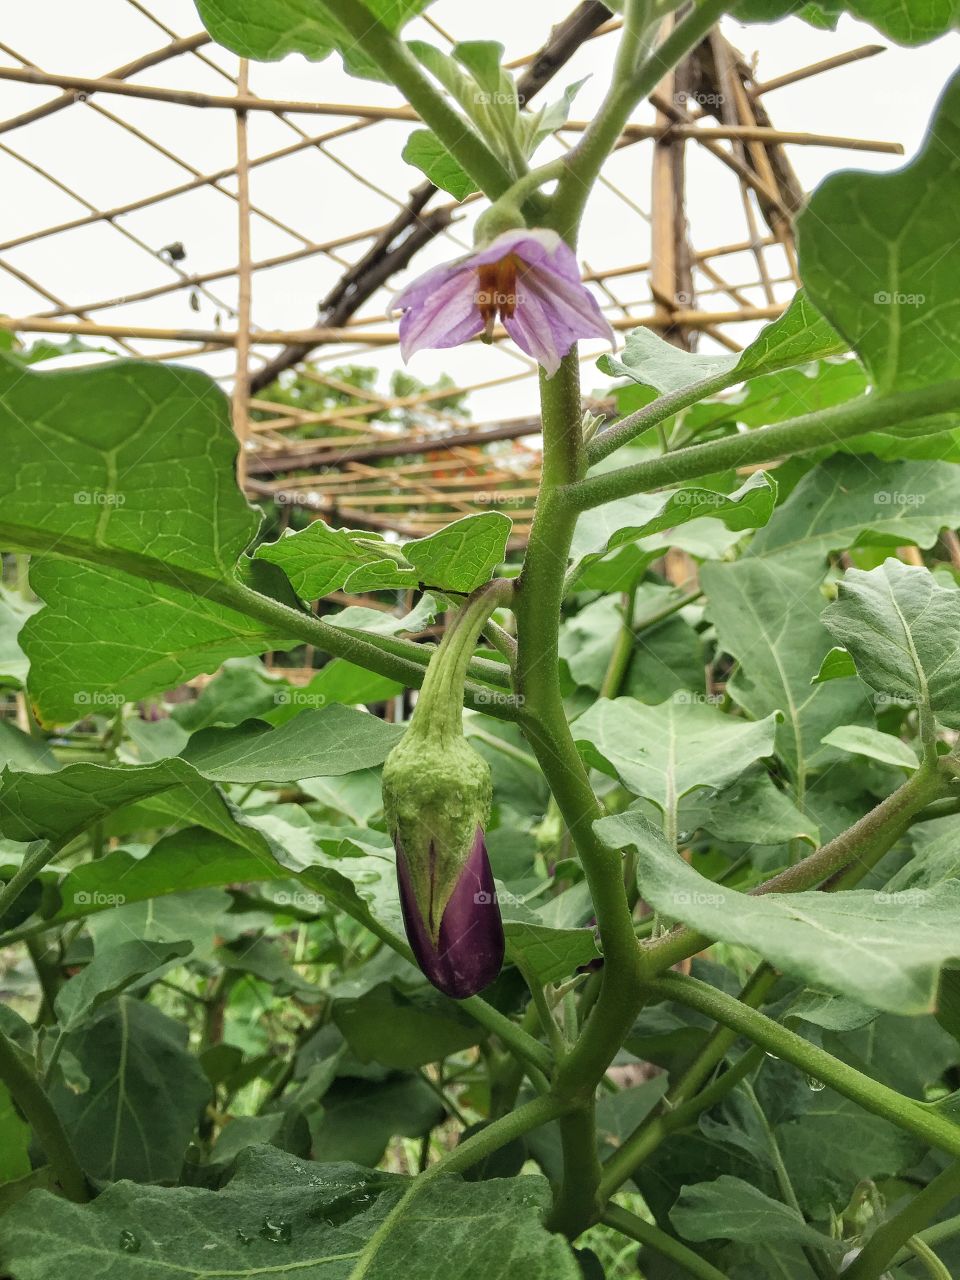 Eggplant with flower